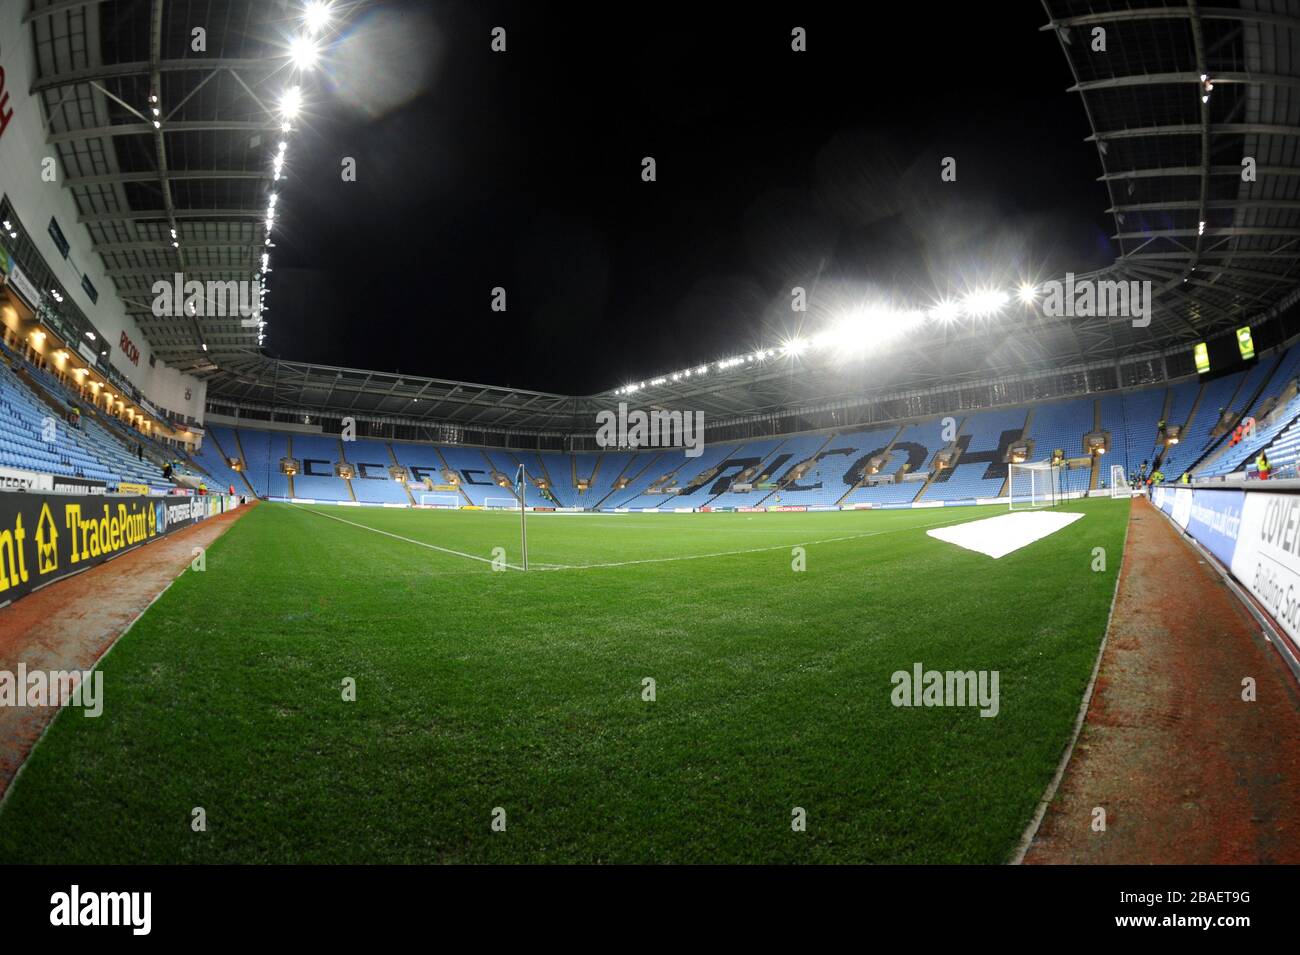 A general view of the Ricoh Arena, home of Coventry City Stock Photo